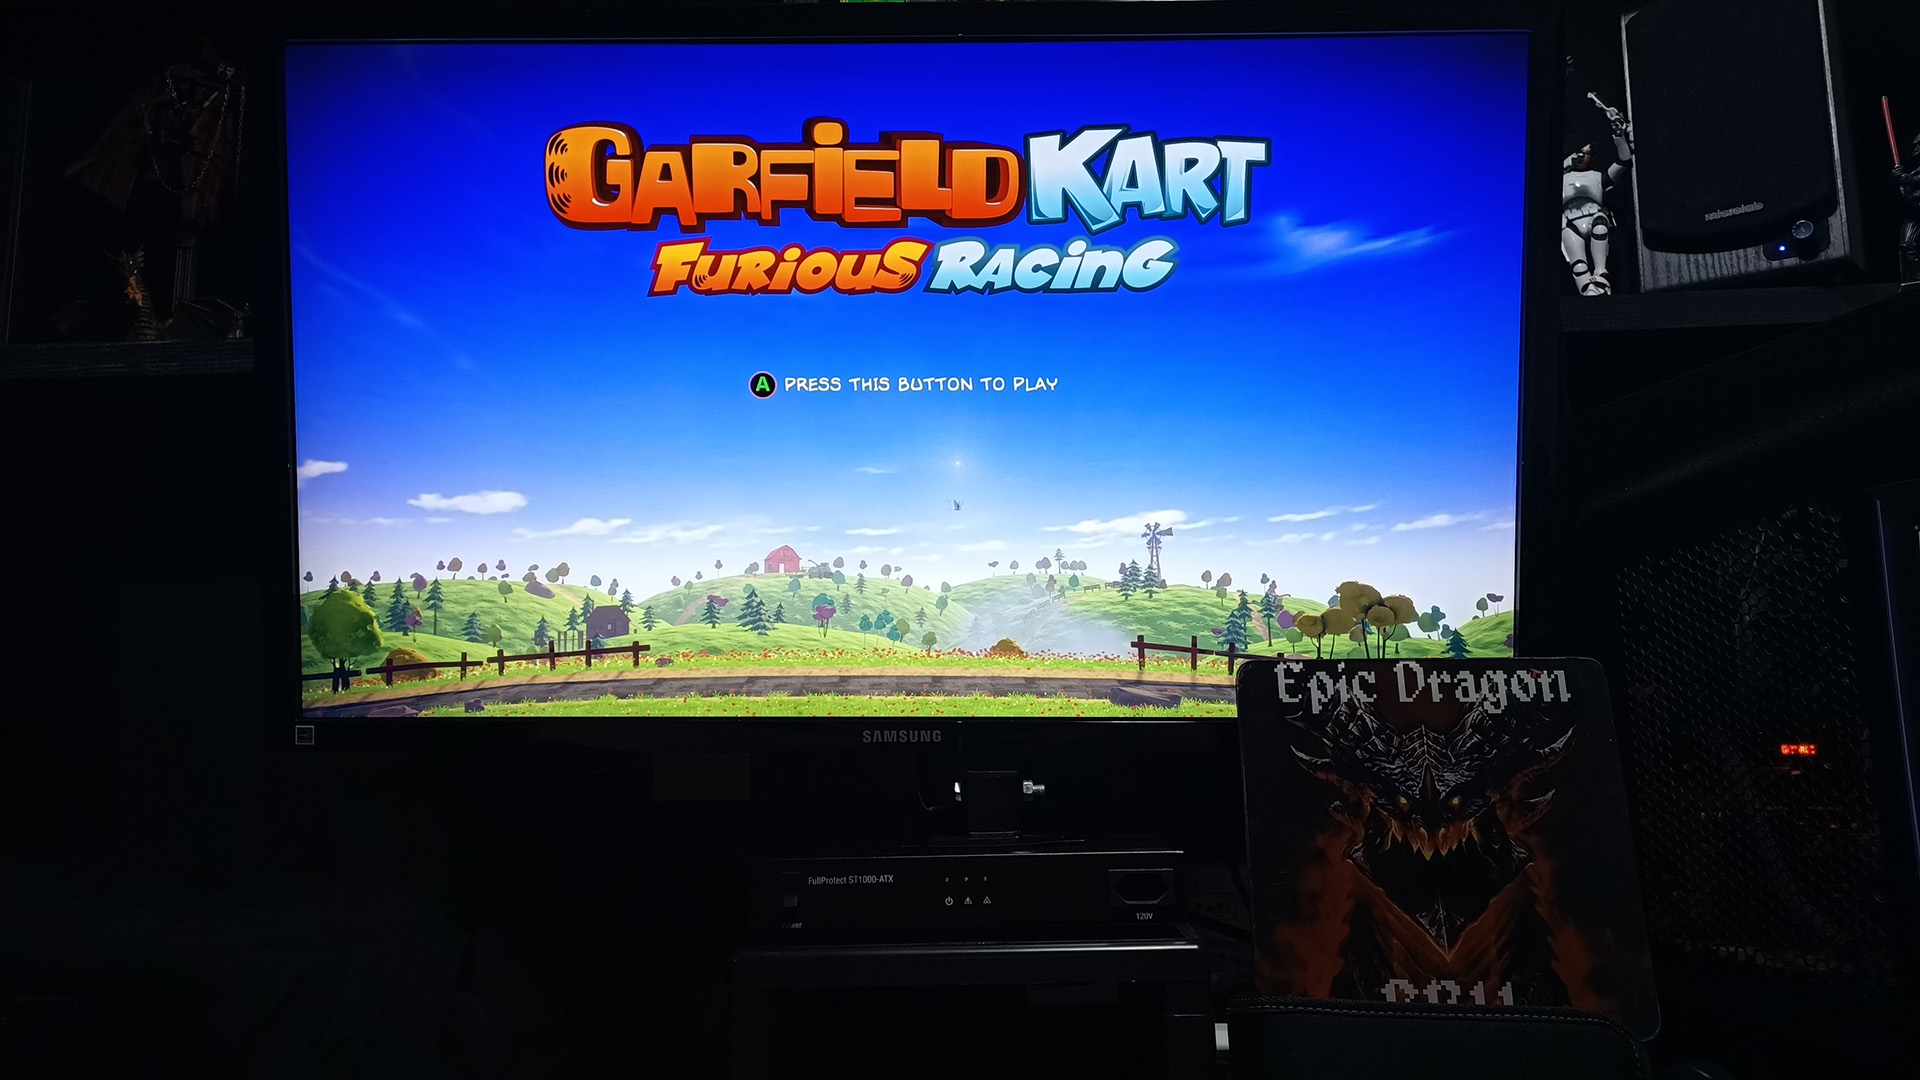 EpicDragon: Garfield Kart Furious Racing: Prohibited Site [Time Trial: Lap Time] (PC) 0:00:55.685 points on 2022-08-14 15:00:19